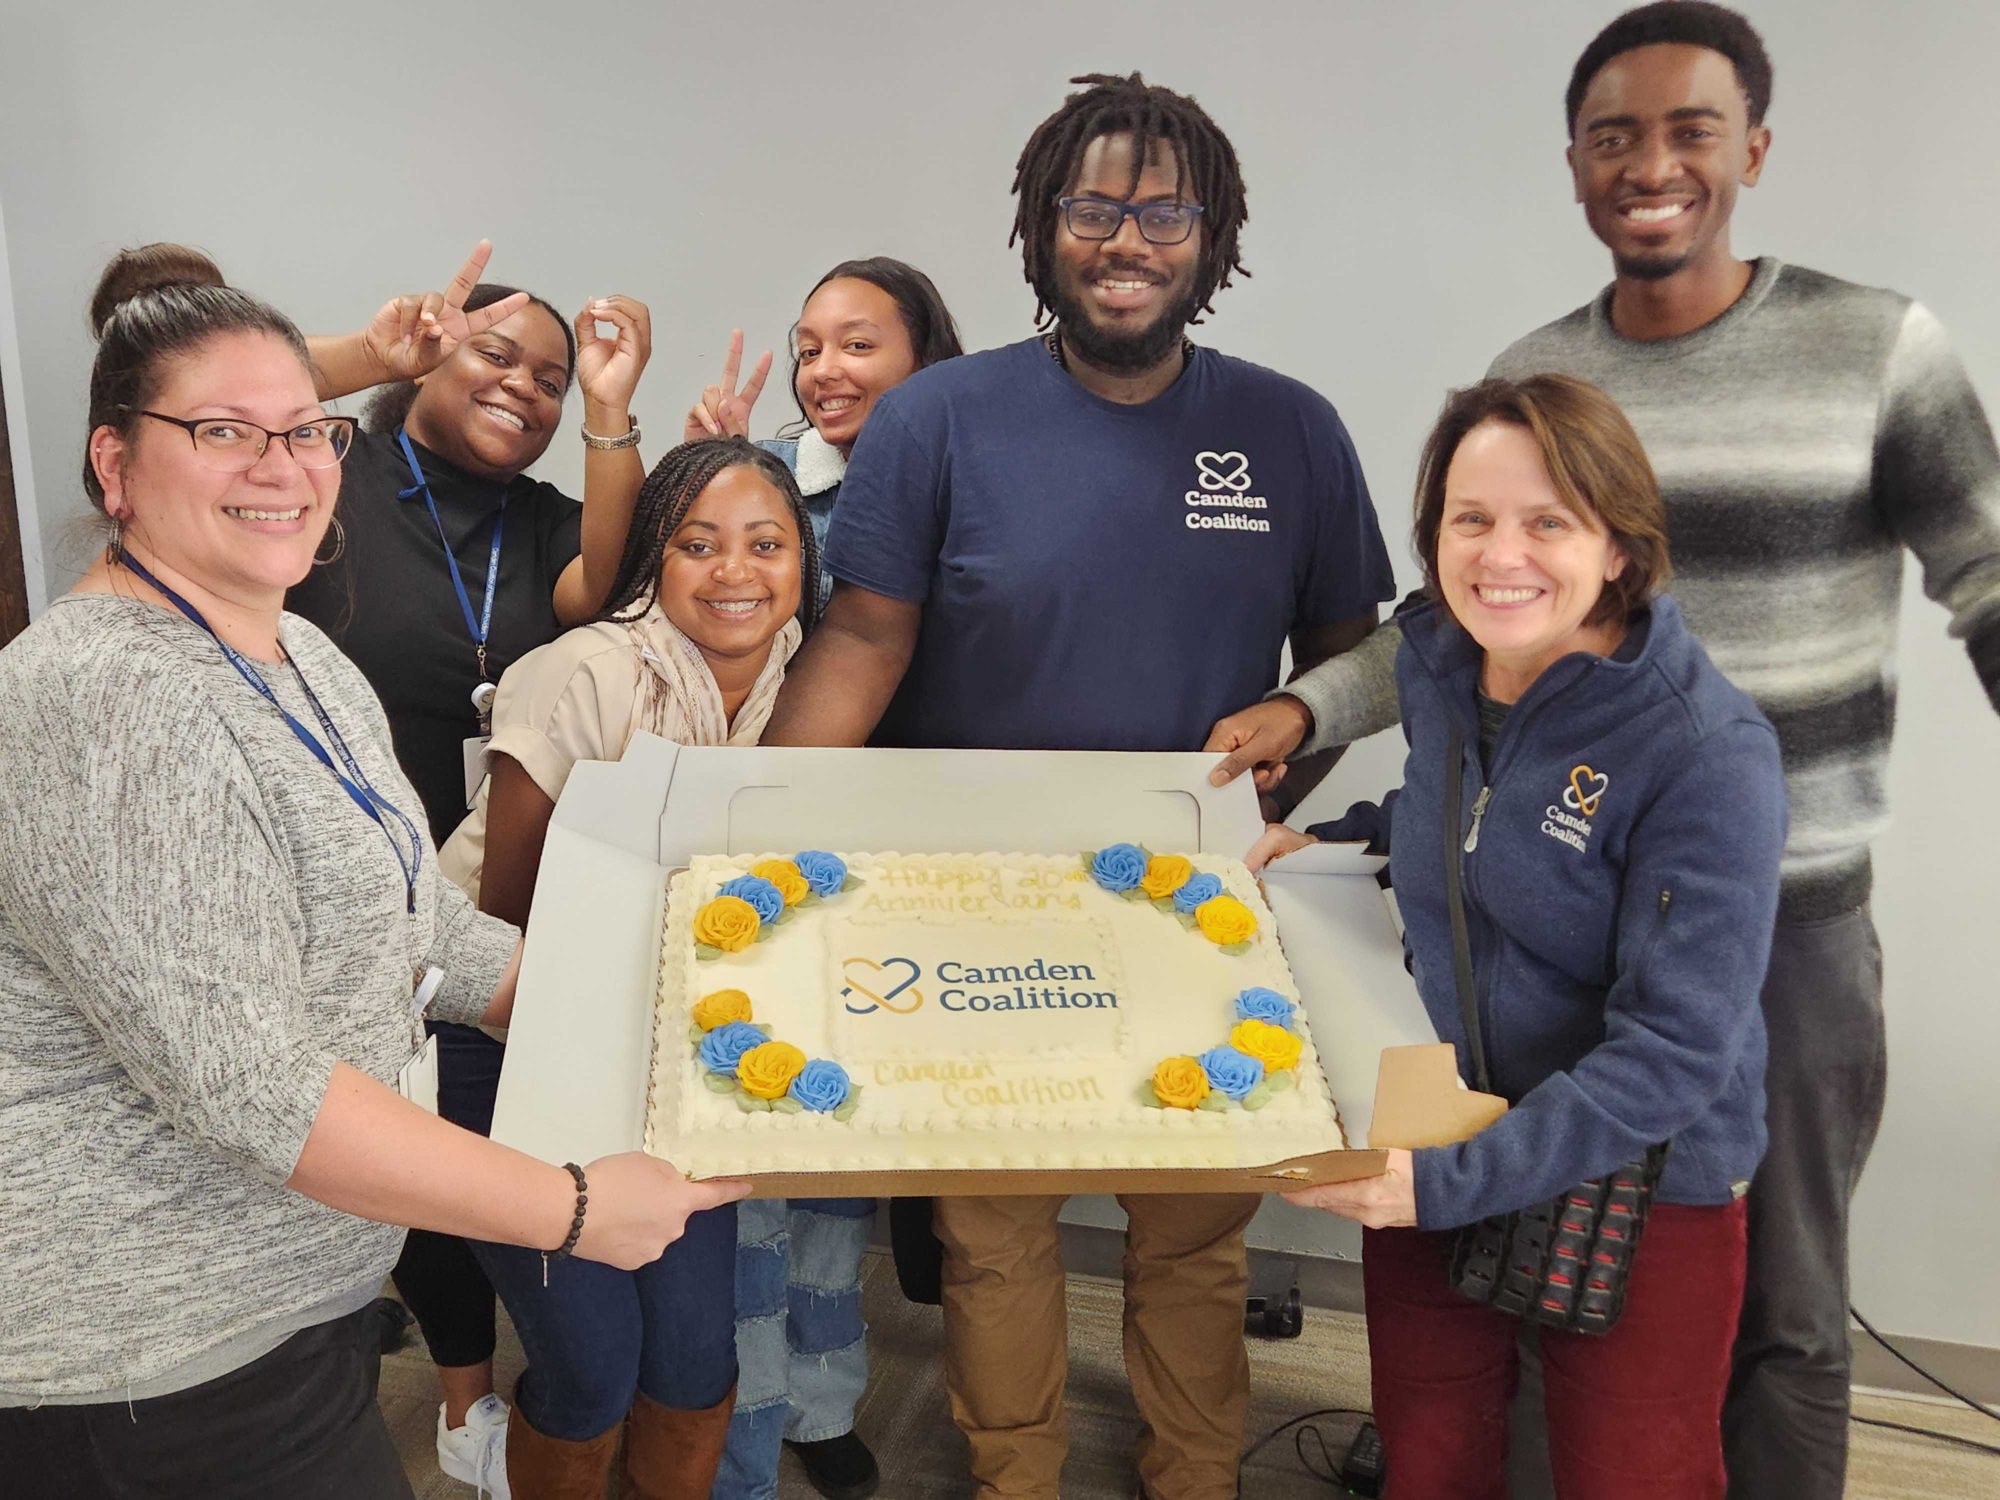 Camden Coalition staff members holding a cake that says "Happy 20th anniversary Camden Coalition"